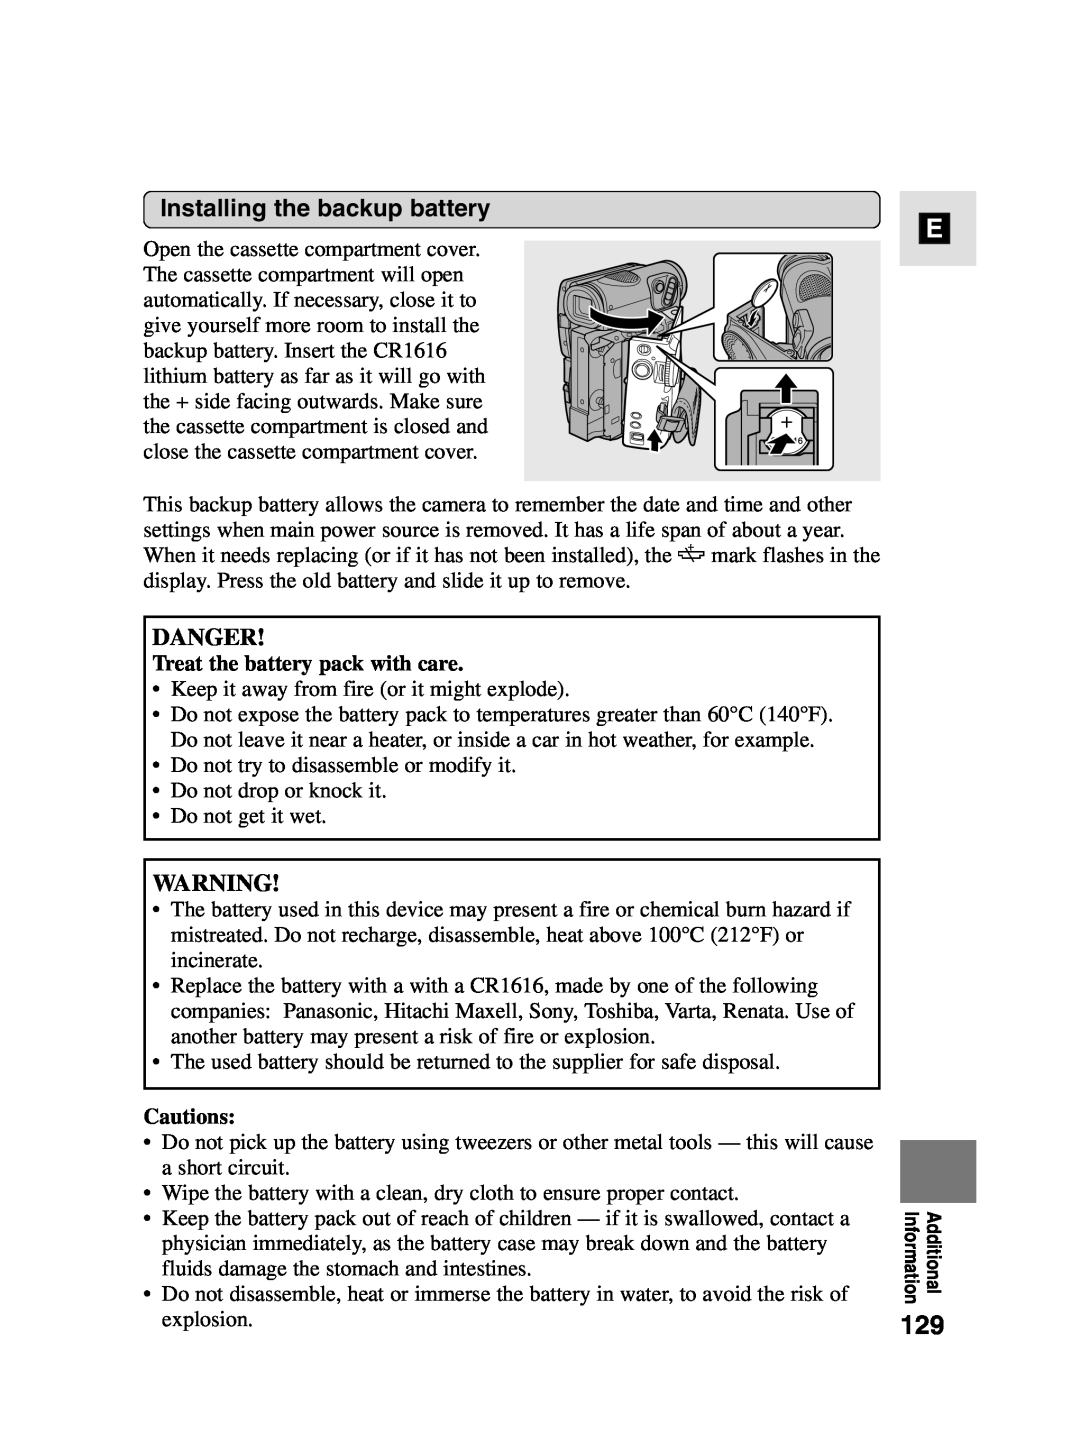 Canon MV4i MC instruction manual Danger, Installing the backup battery, Treat the battery pack with care, Cautions 